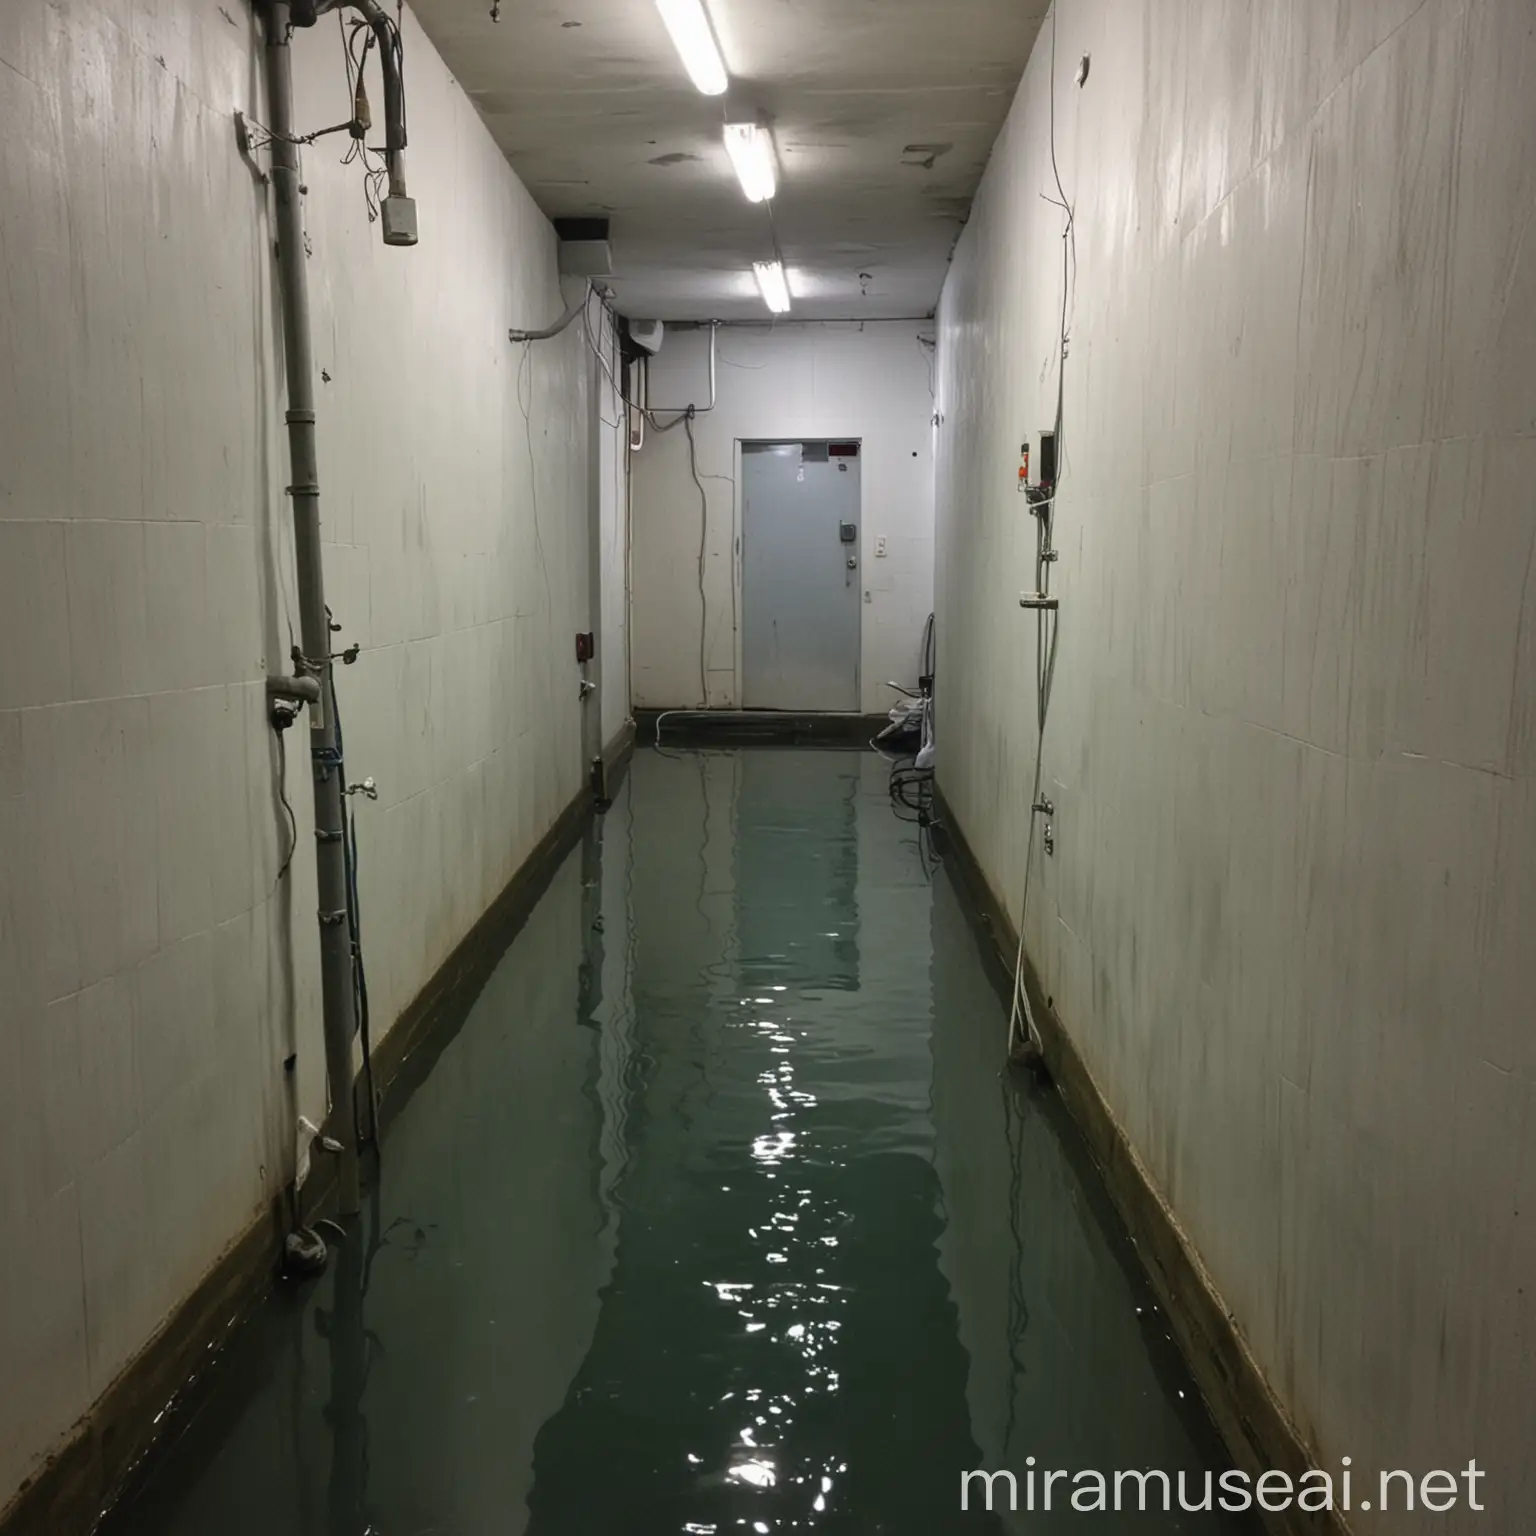 Mysterious Backroom with Water Evoking an Unsettling Atmosphere